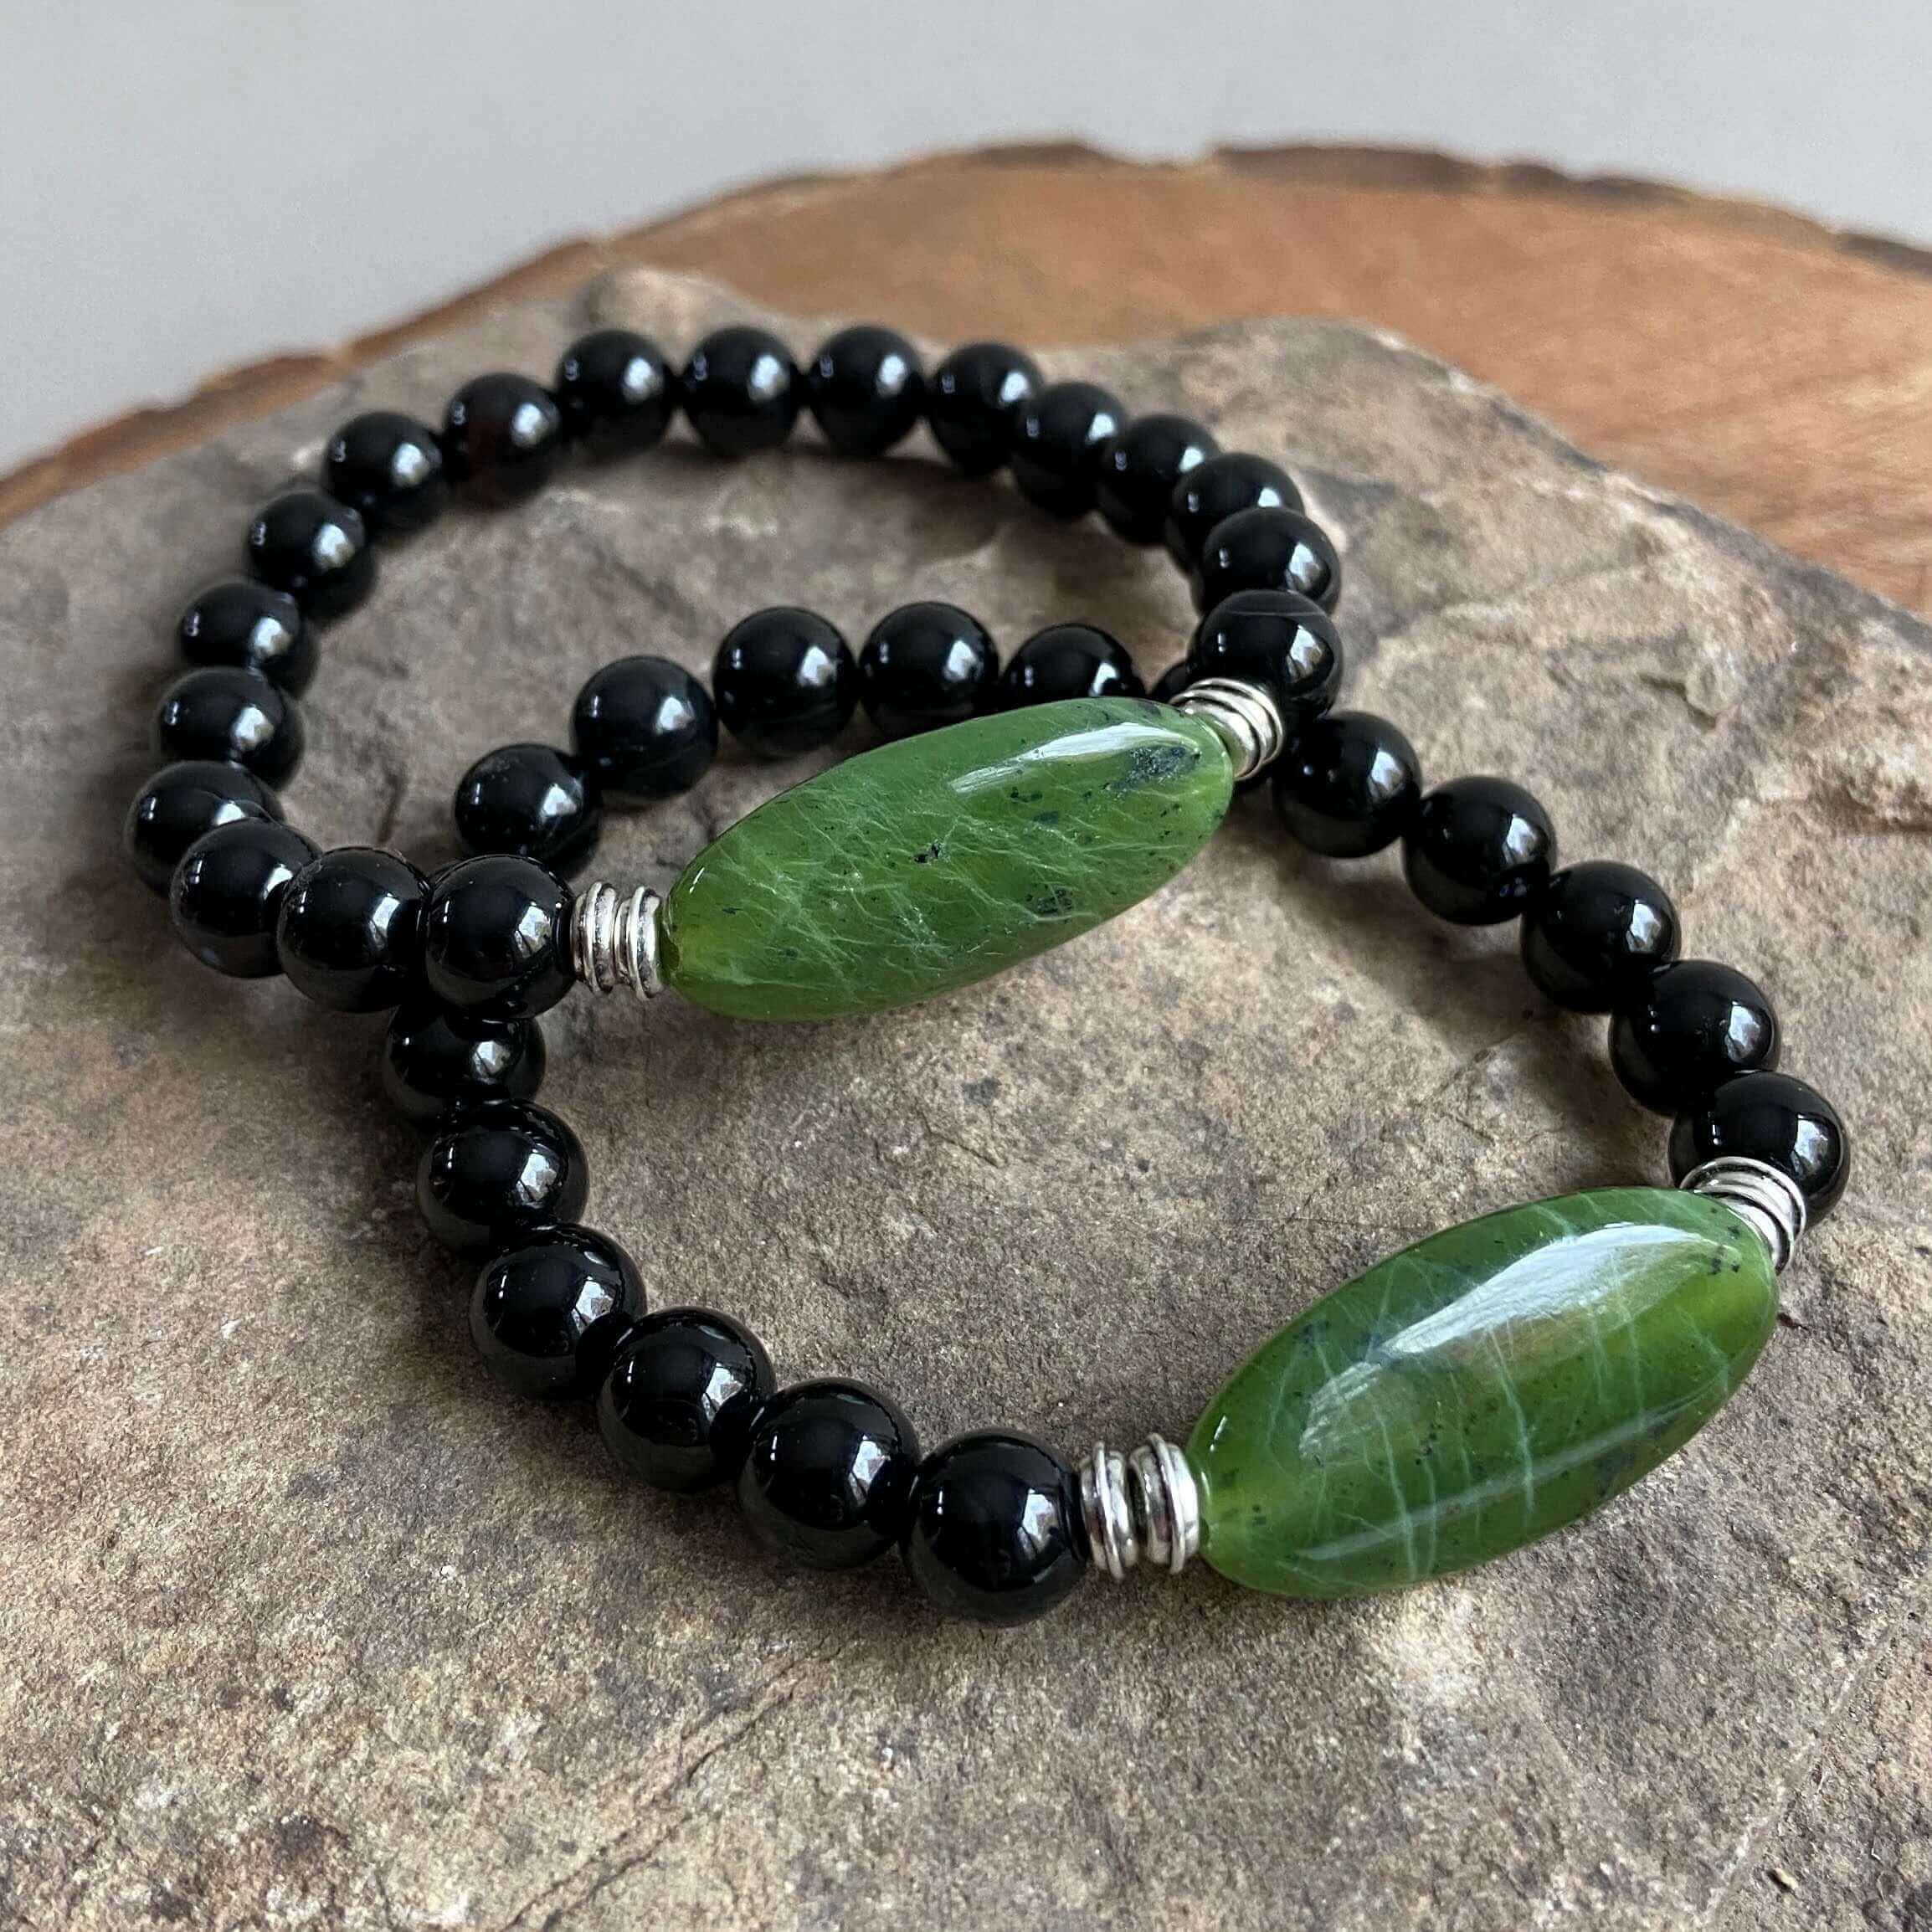 Jade Focal Bracelet This bracelet is made with high-quality Jade and either Black Onyx or Obsidian stones which bring calm and insight to the wearer. Zodiac Signs: Capricorn, Gemini, Libra, Taurus, and Virgo. Chakra: Heart. Handmade with authentic crystal